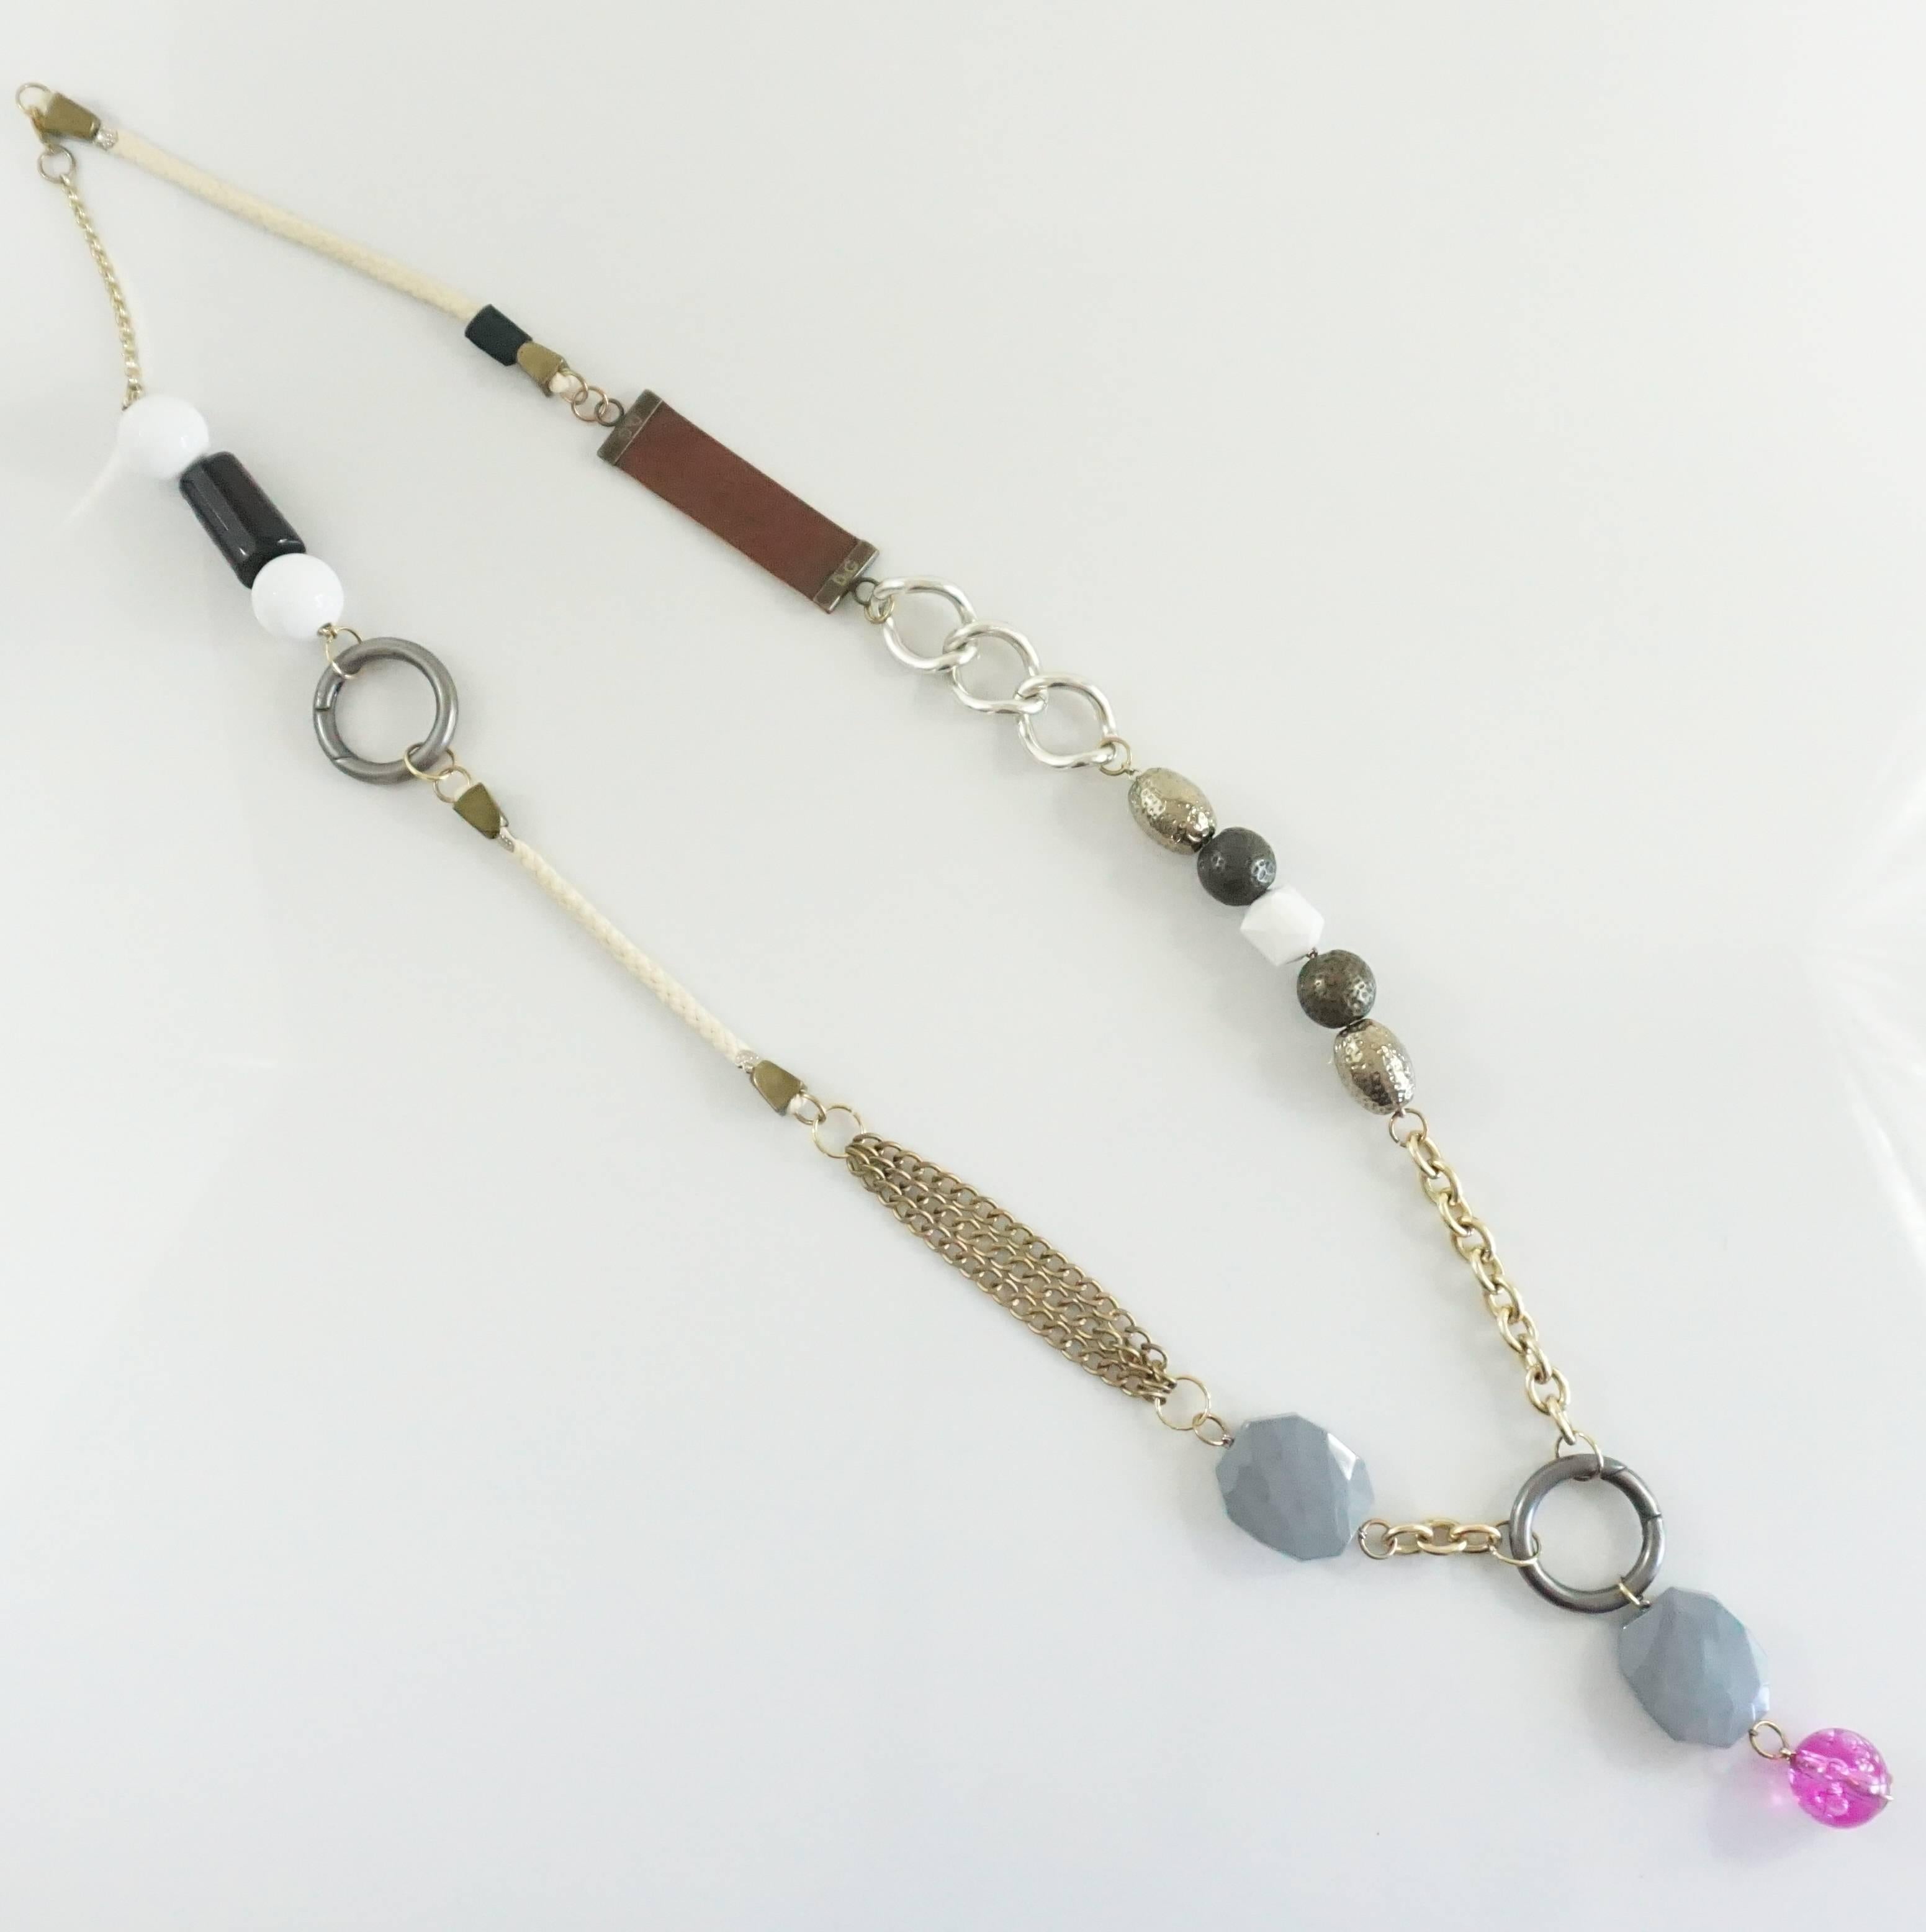 This intricate D & G long necklace is comprised of different sections and different materials. There are two silver circles which can be opened and removed to change the necklace (image 3 is an example). This necklace has a leather strip with